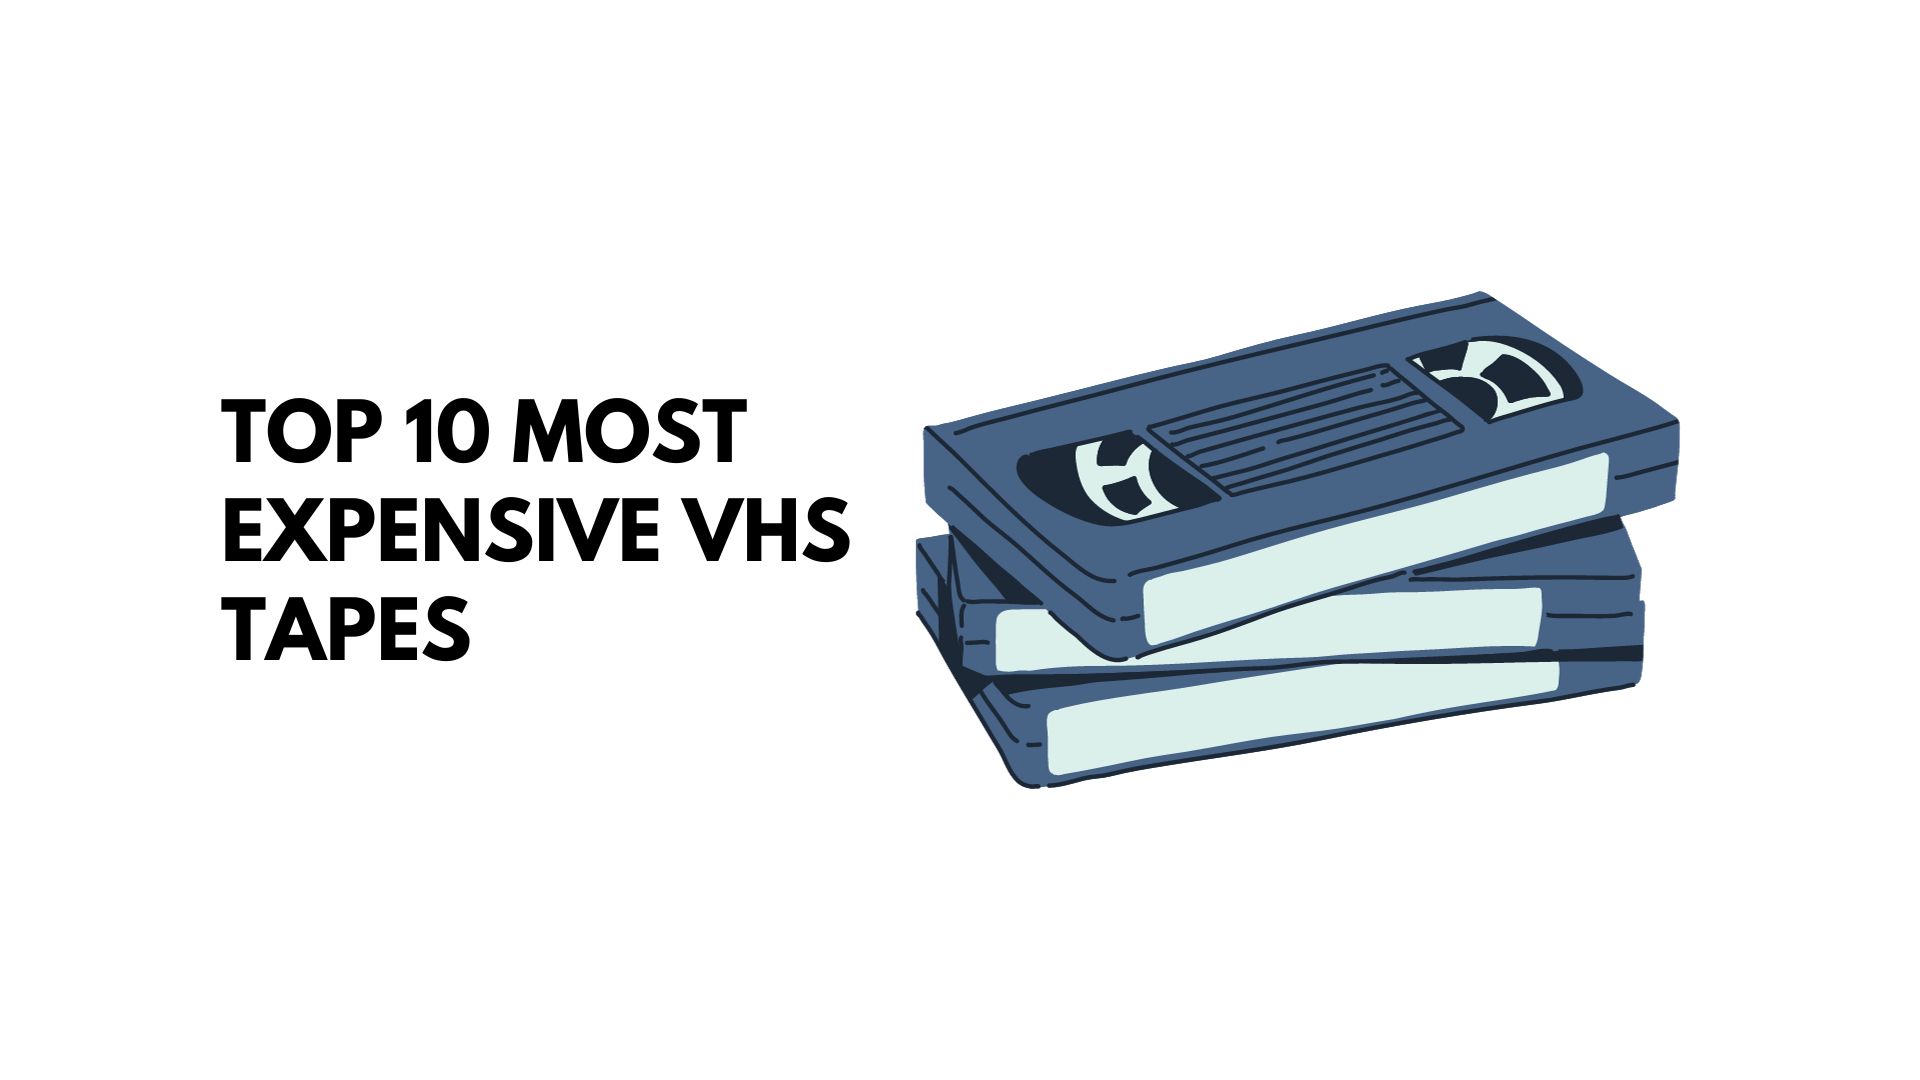 Top 10 Most Expensive VHS Tapes In The World